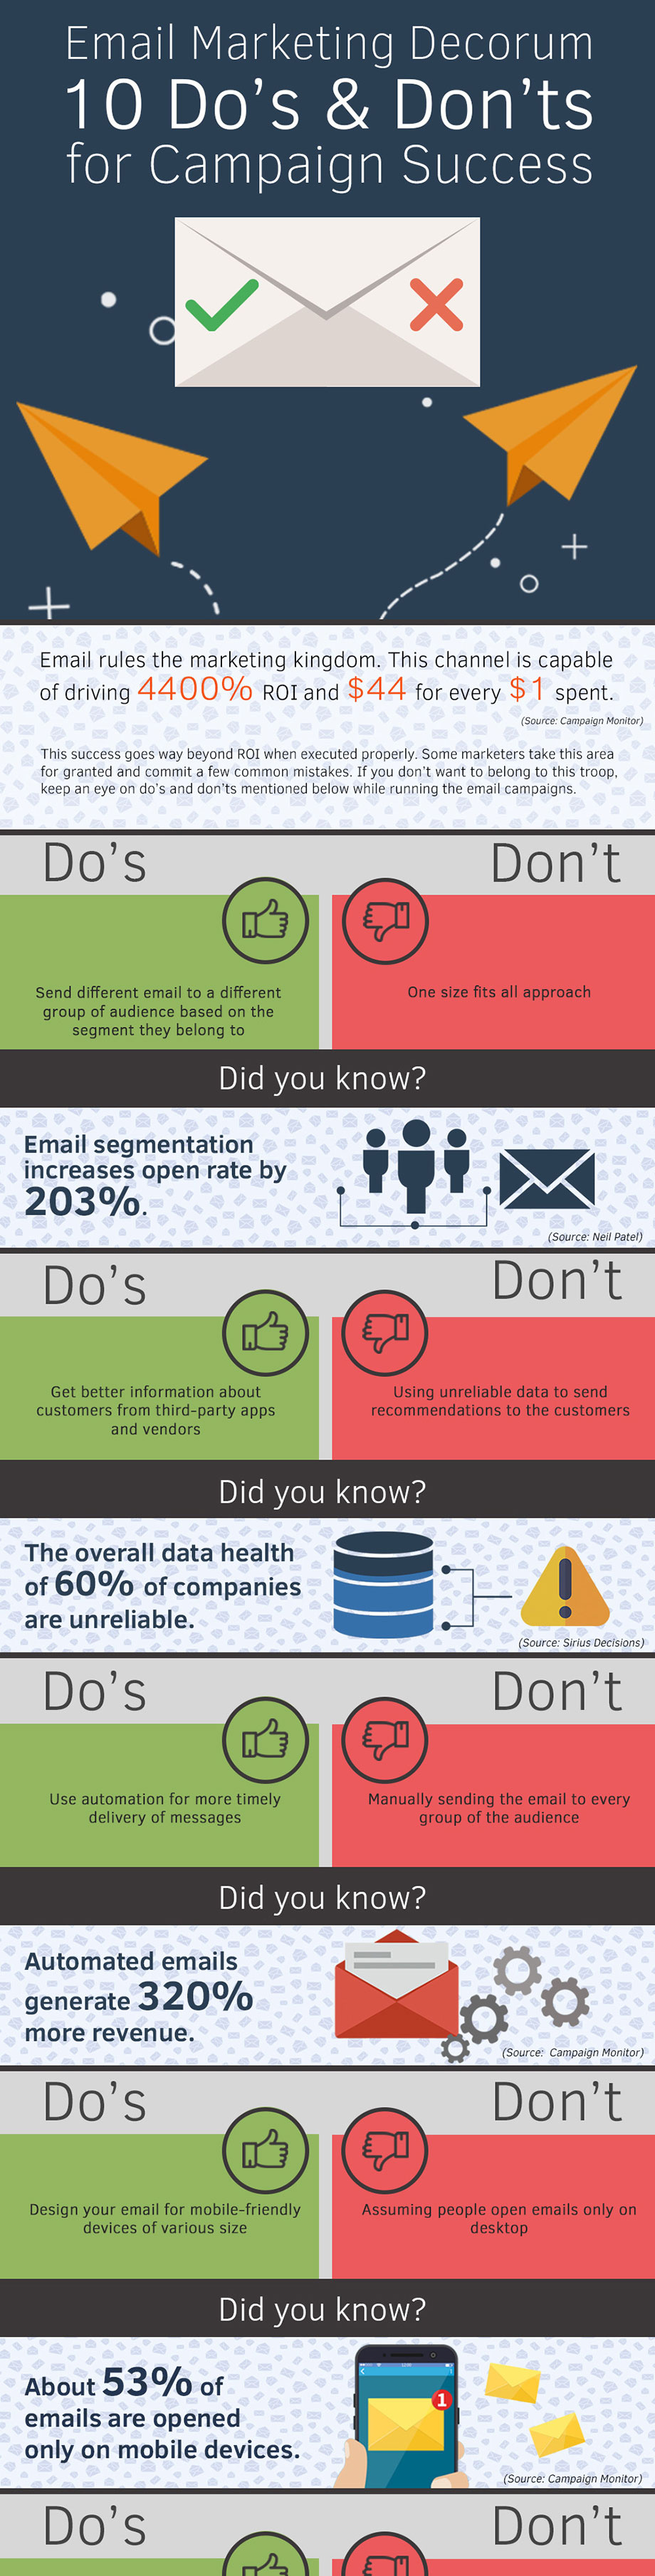 email-marketing-decorum-dos-donts-campaign-success-infographic-1